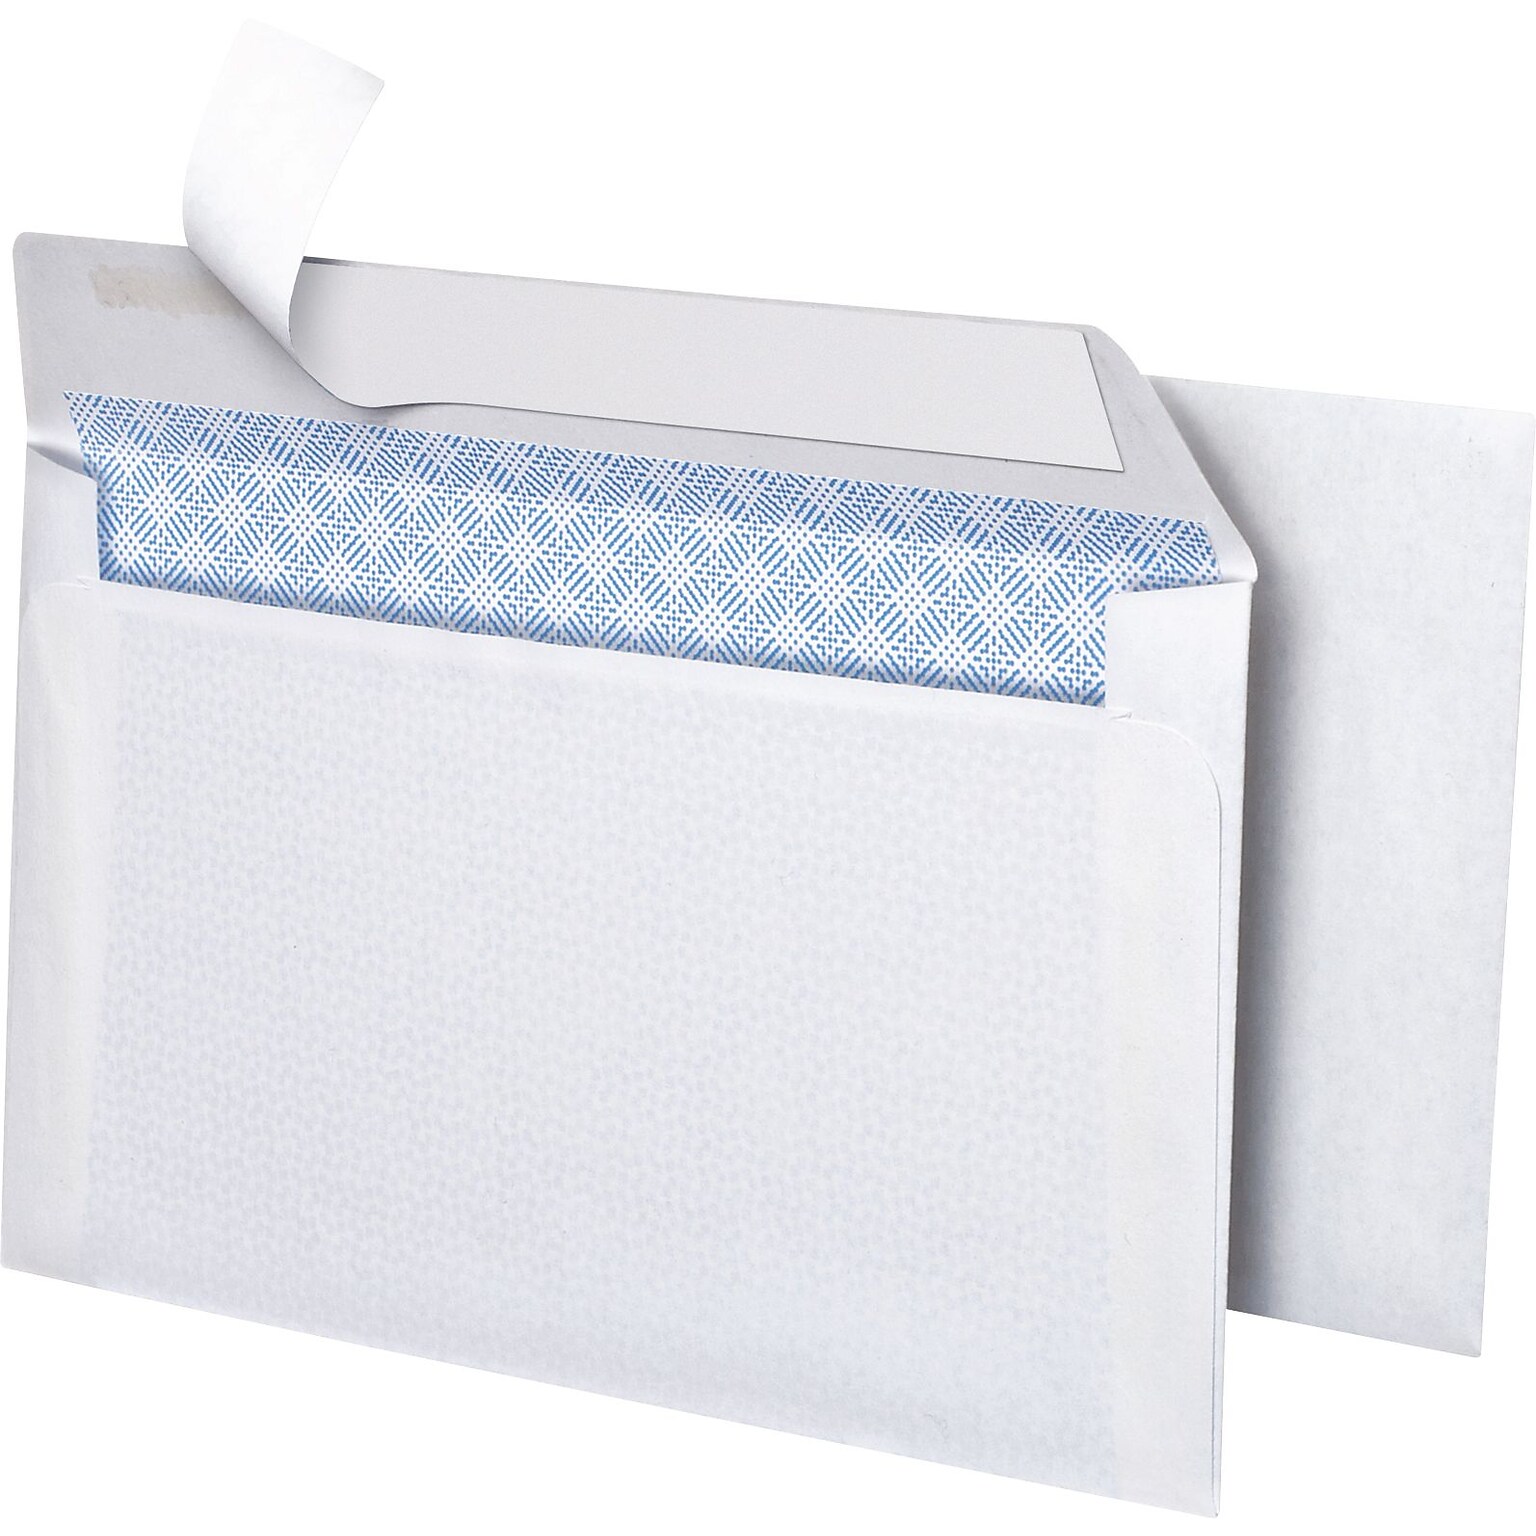 Staples® Simply Self Seal Security Tinted #6 Business Envelopes, 3 5/8 x 6 1/2, White, 50/Box (862999)